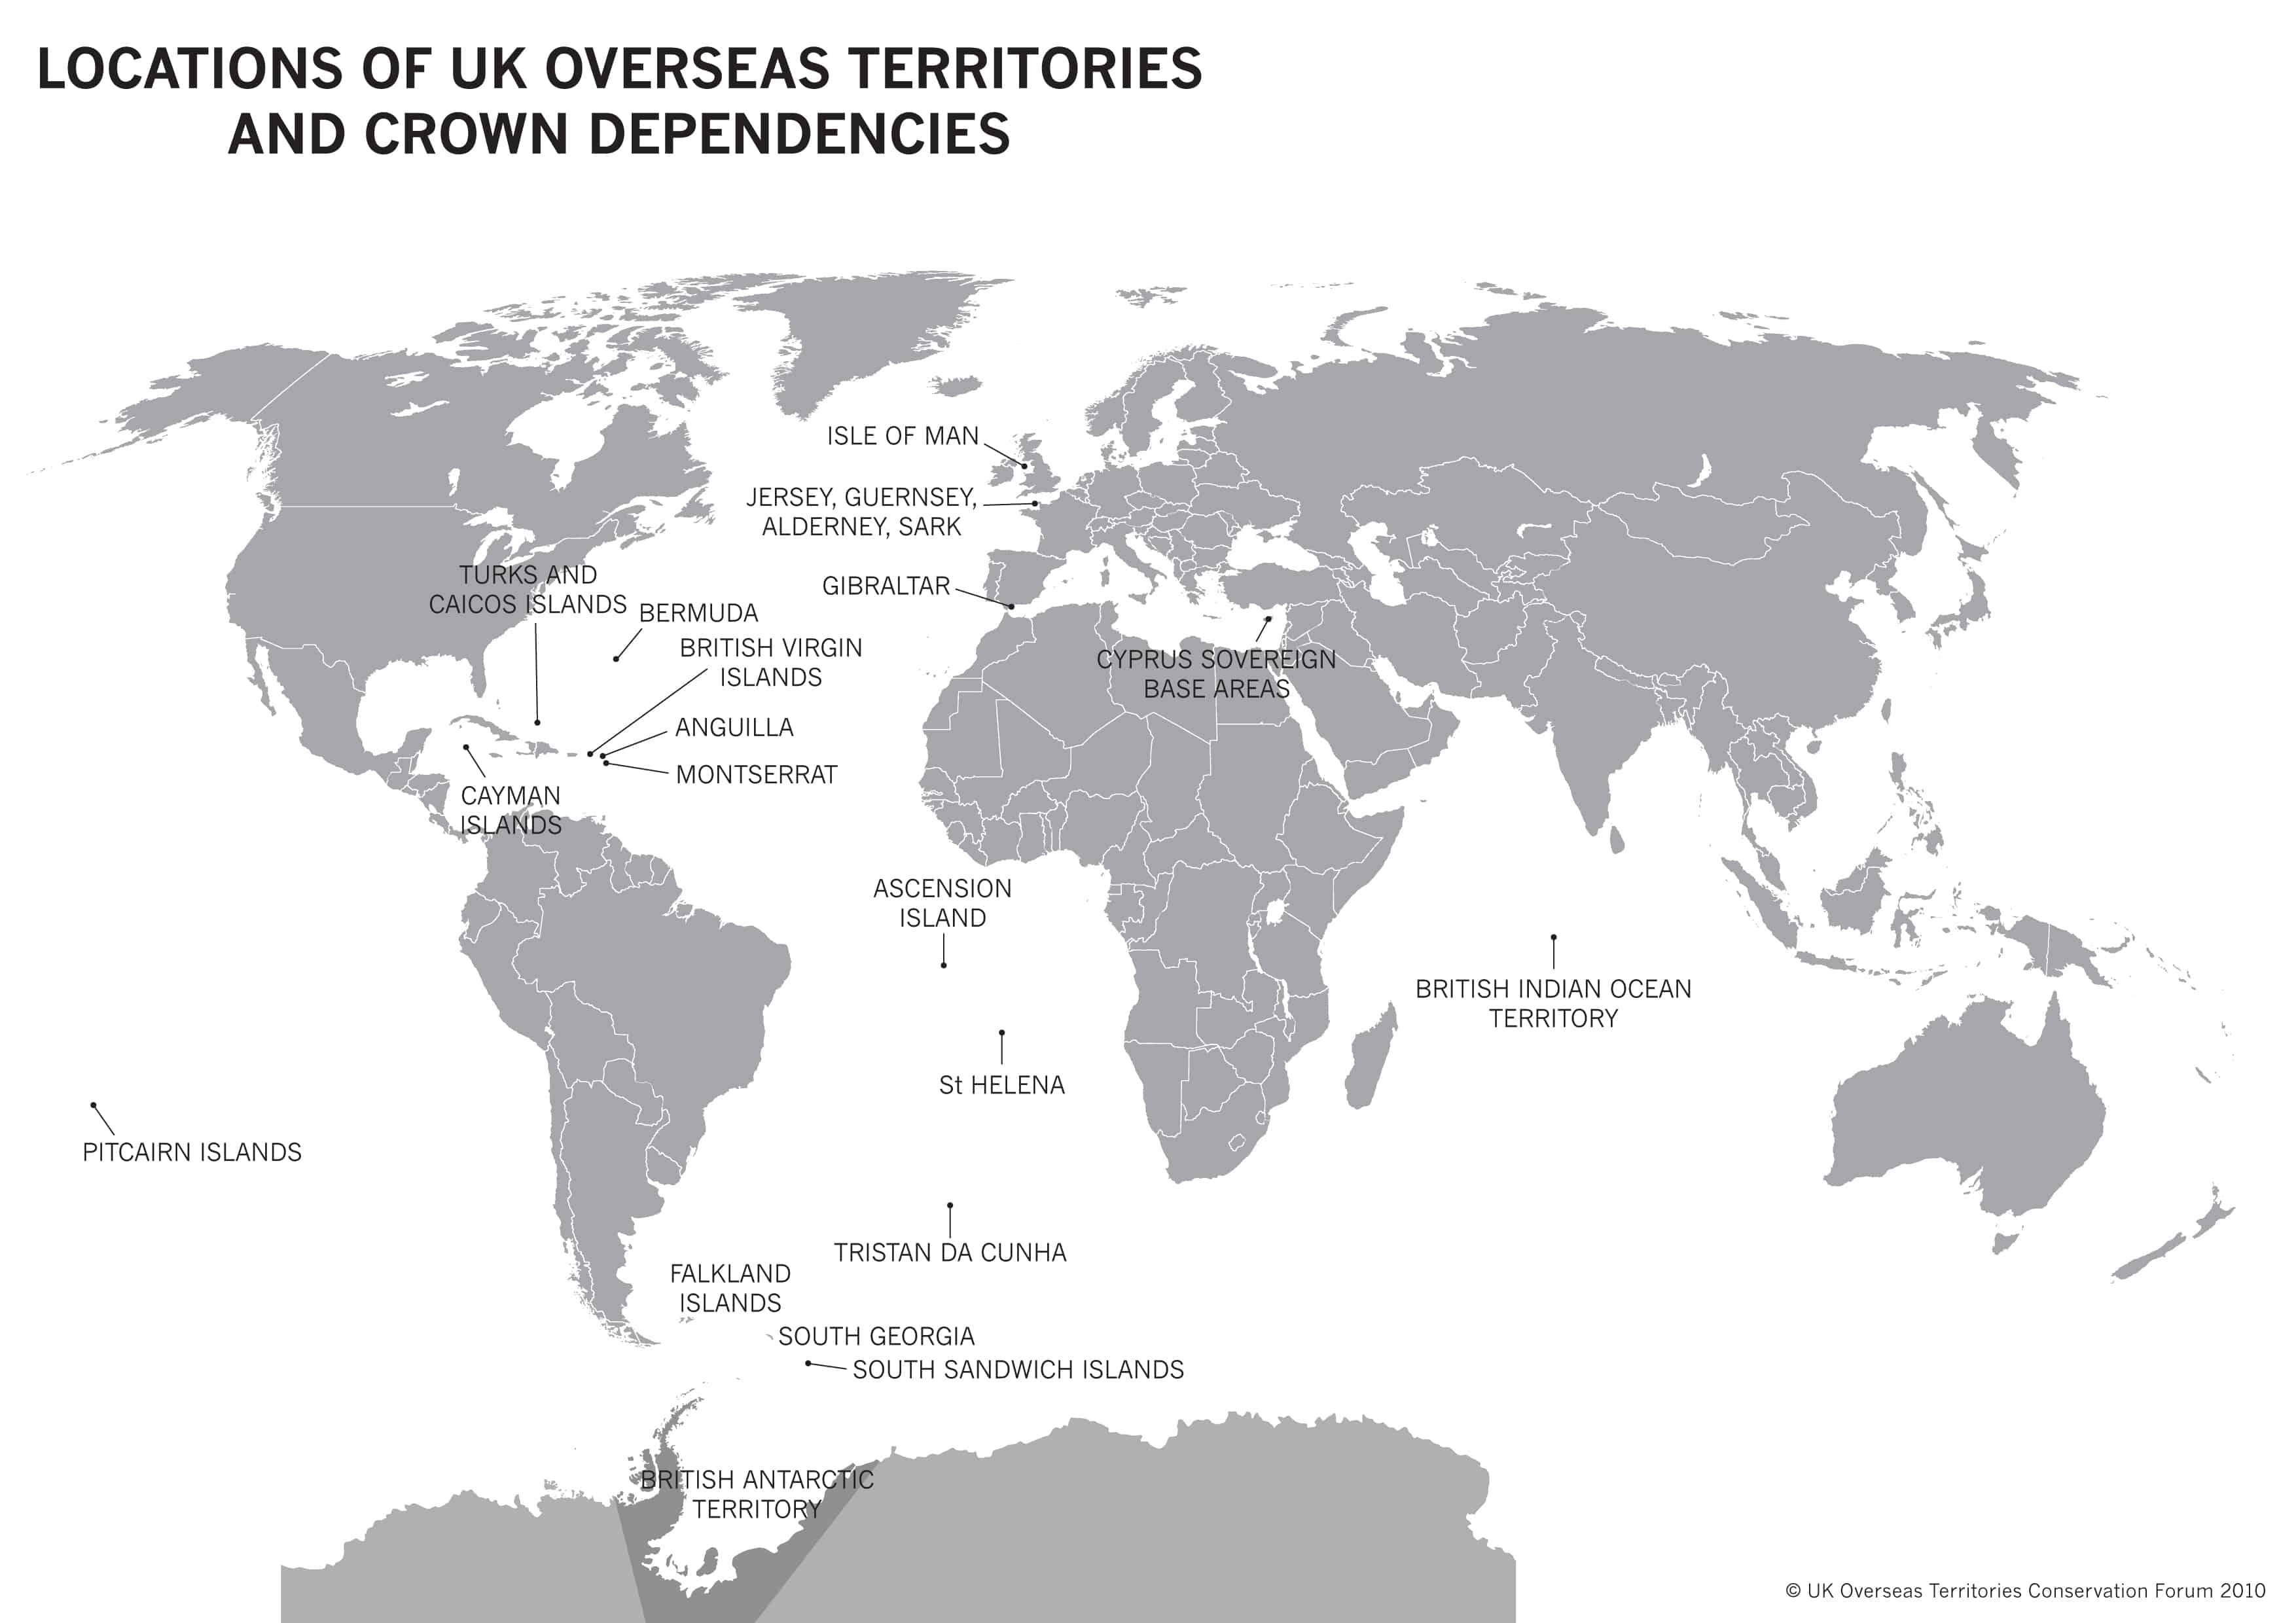 Global overview of UKOTs/CDs